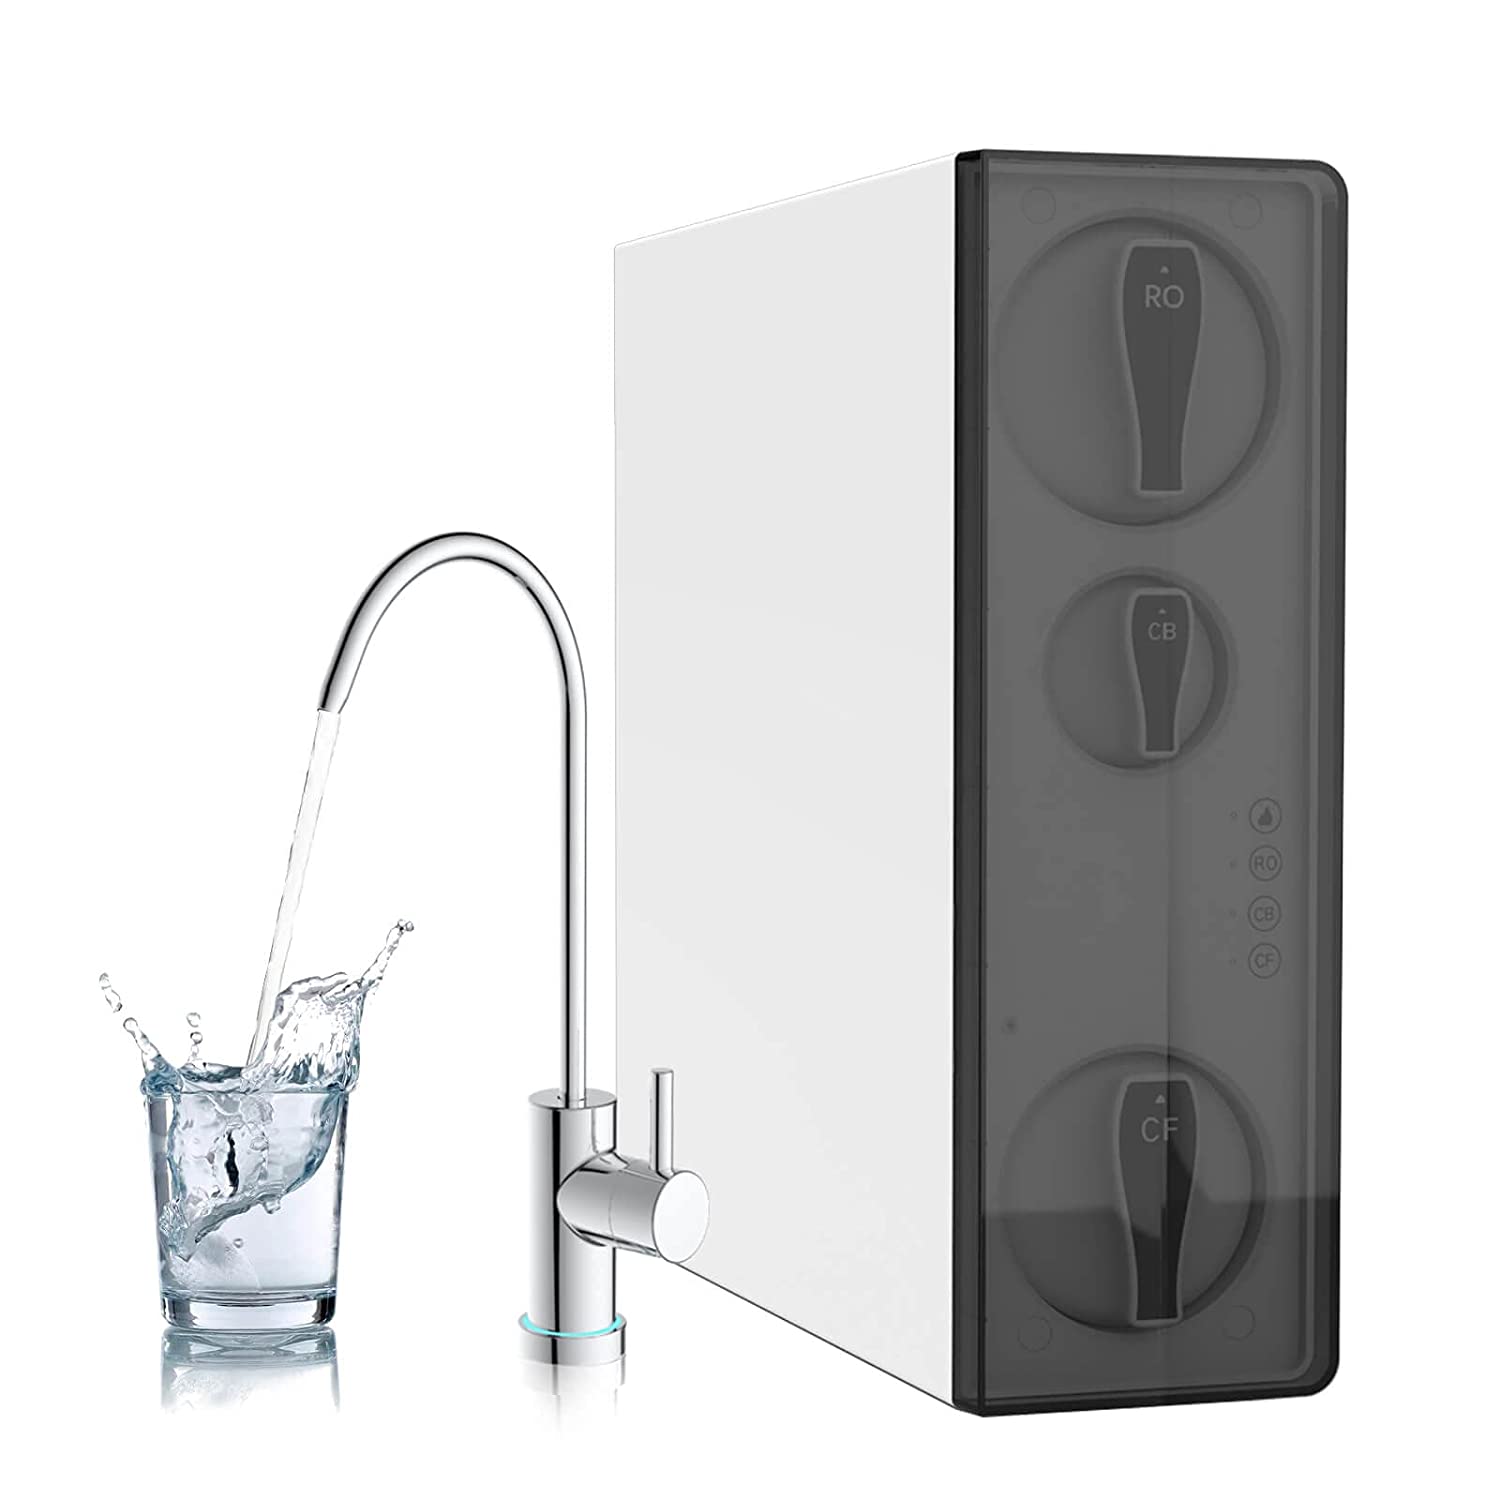 AWater 1 RO Reverse Osmosis Water Filtration System